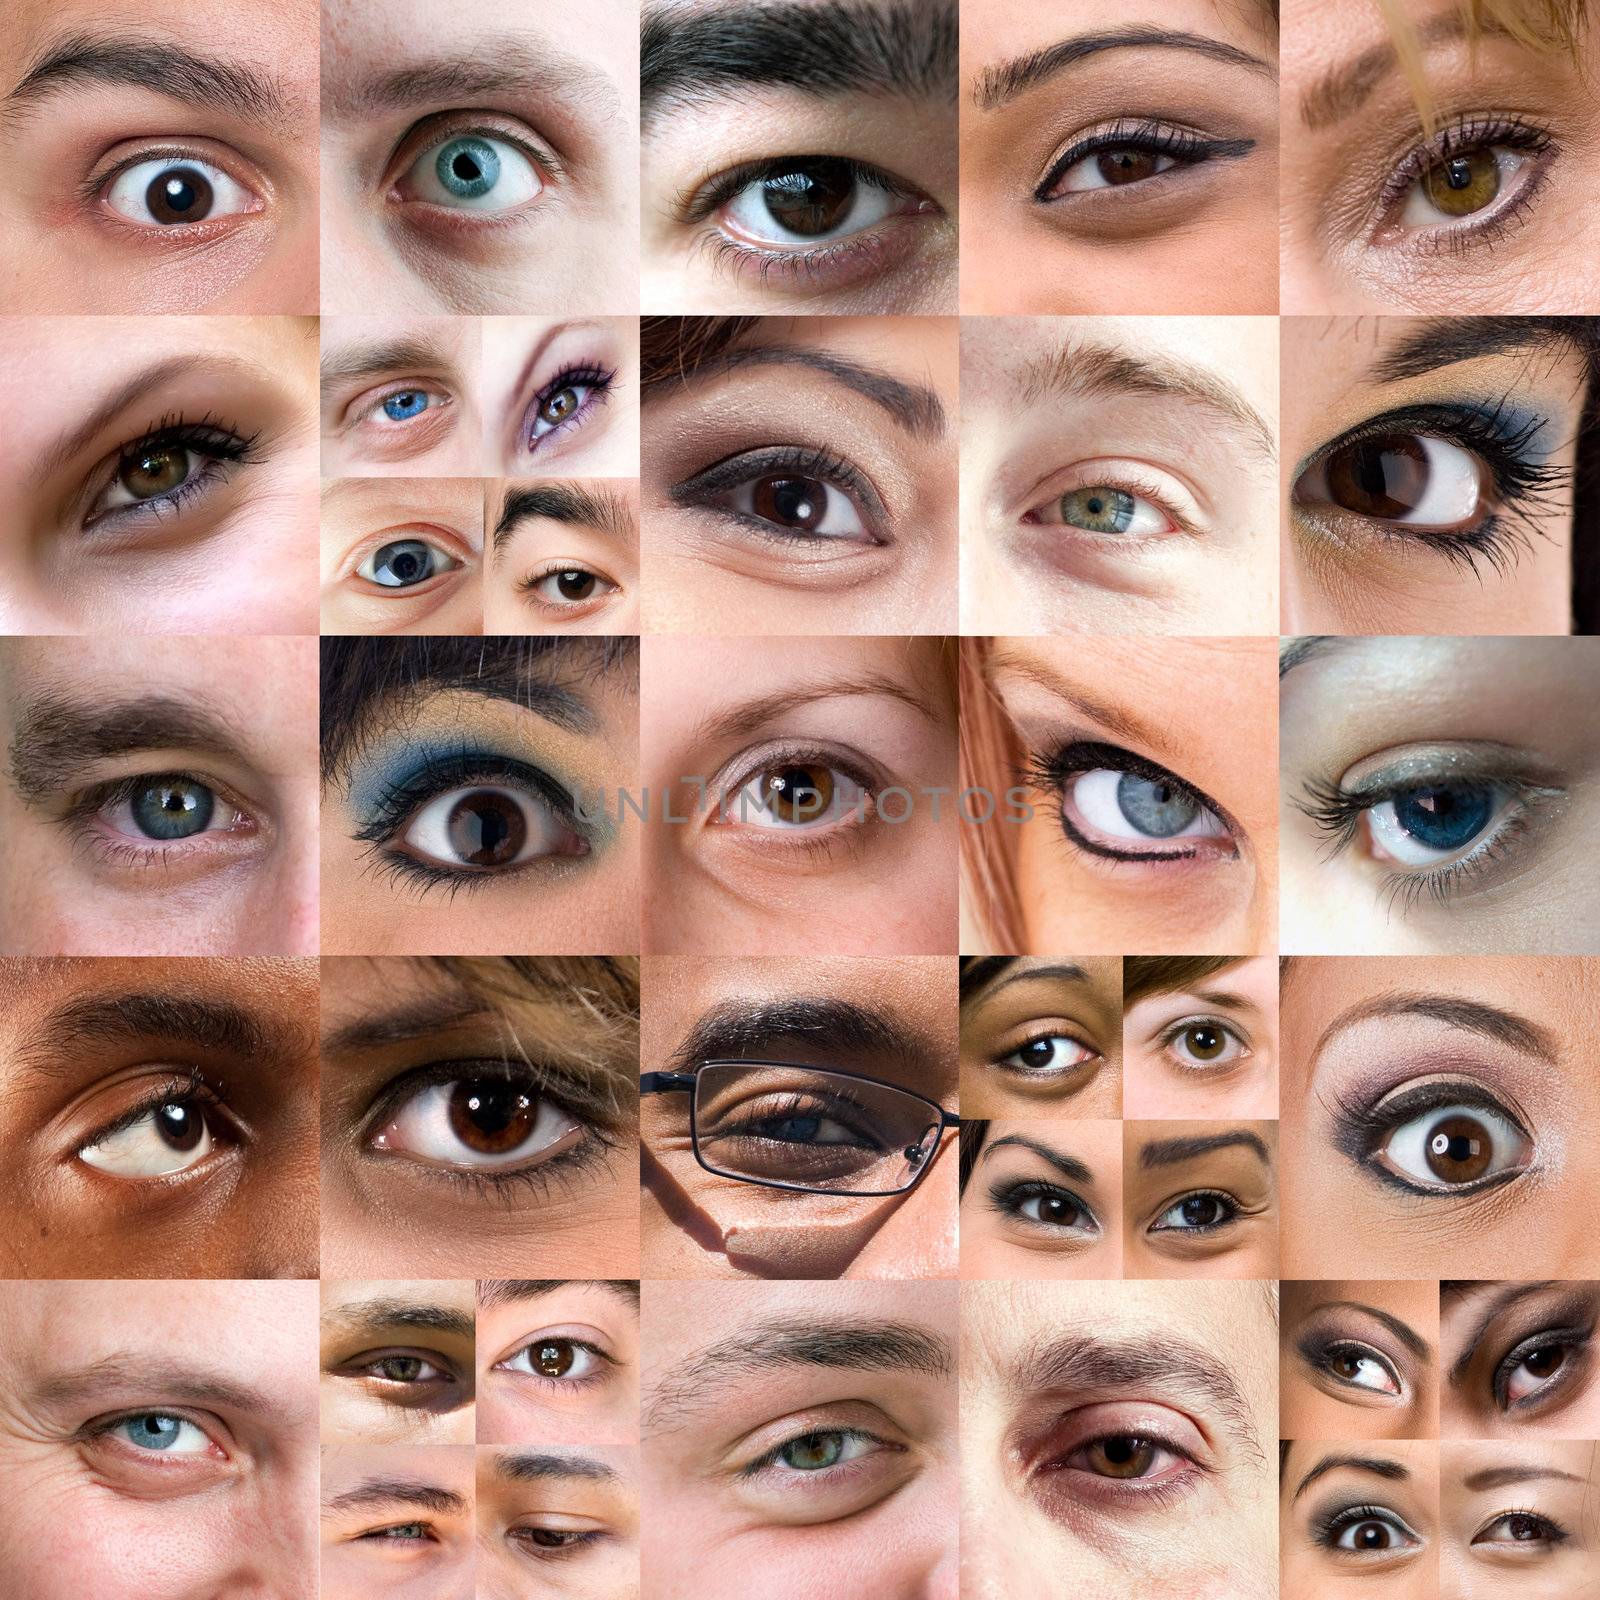 A variety of square cropped eyeball close ups with both male and female eyes. 